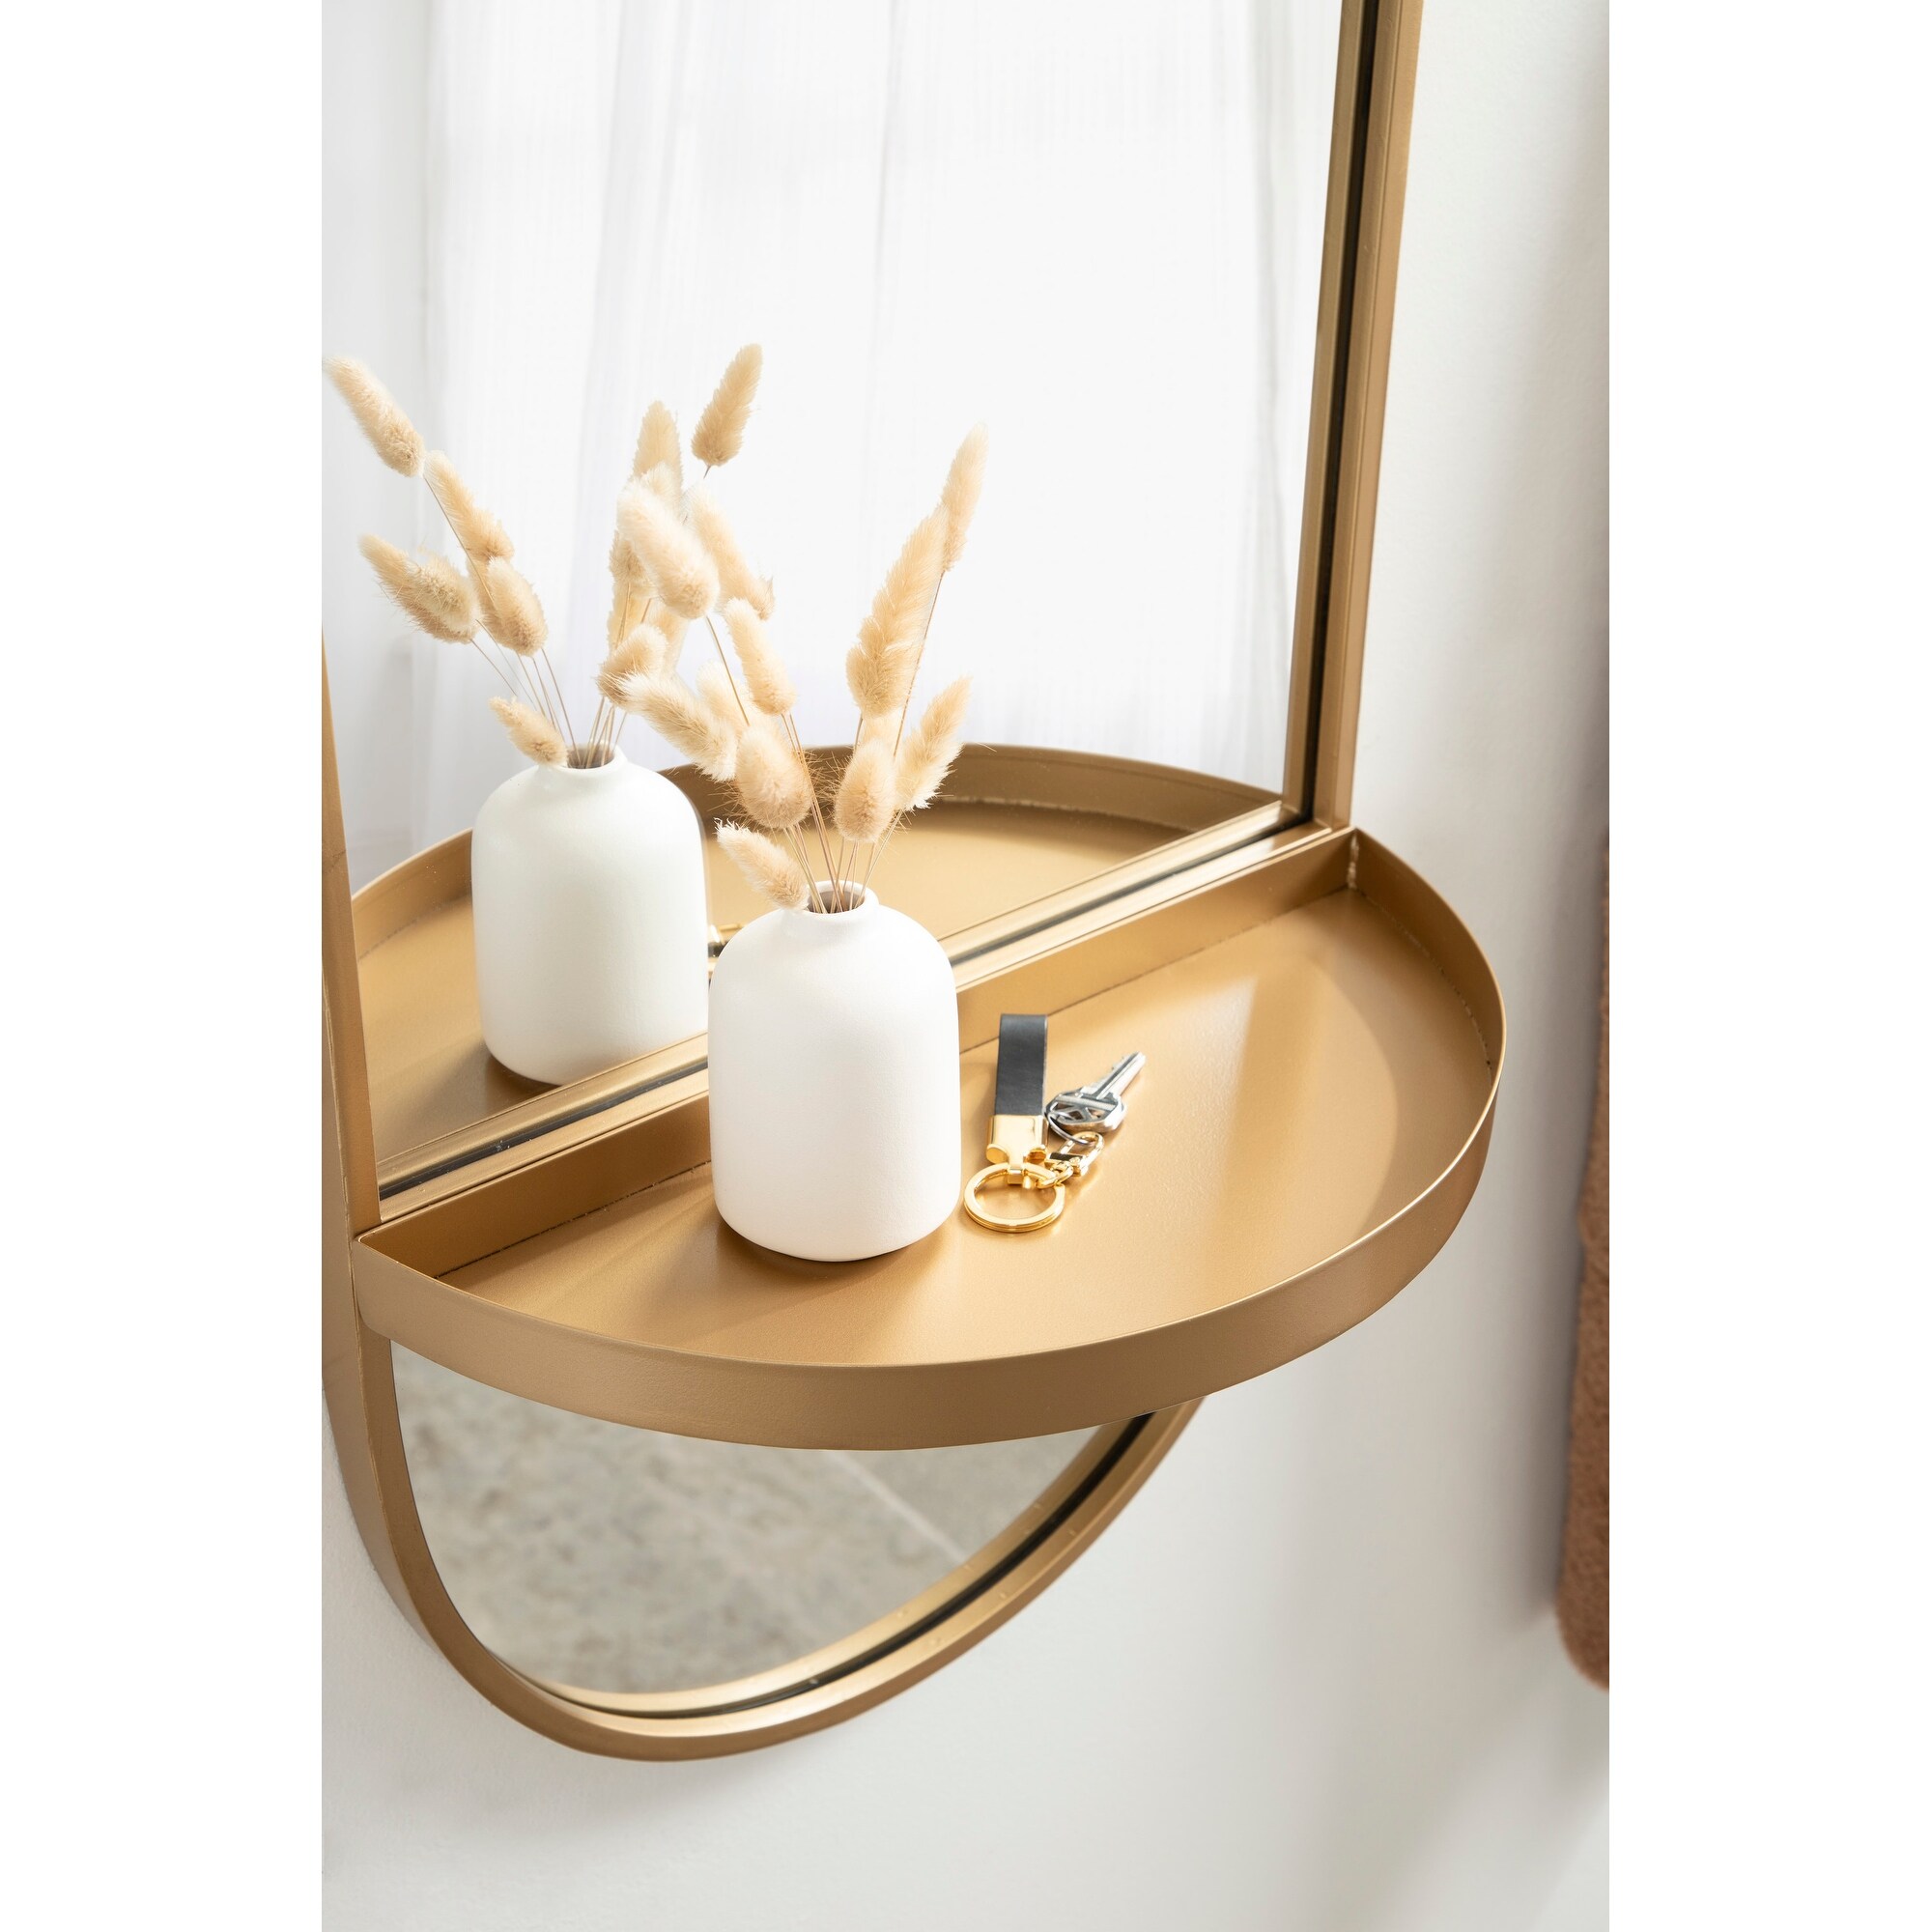 Kate and Laurel Estero Metal Oval Wall Mirror with Shelf Bed Bath   Beyond 25897131